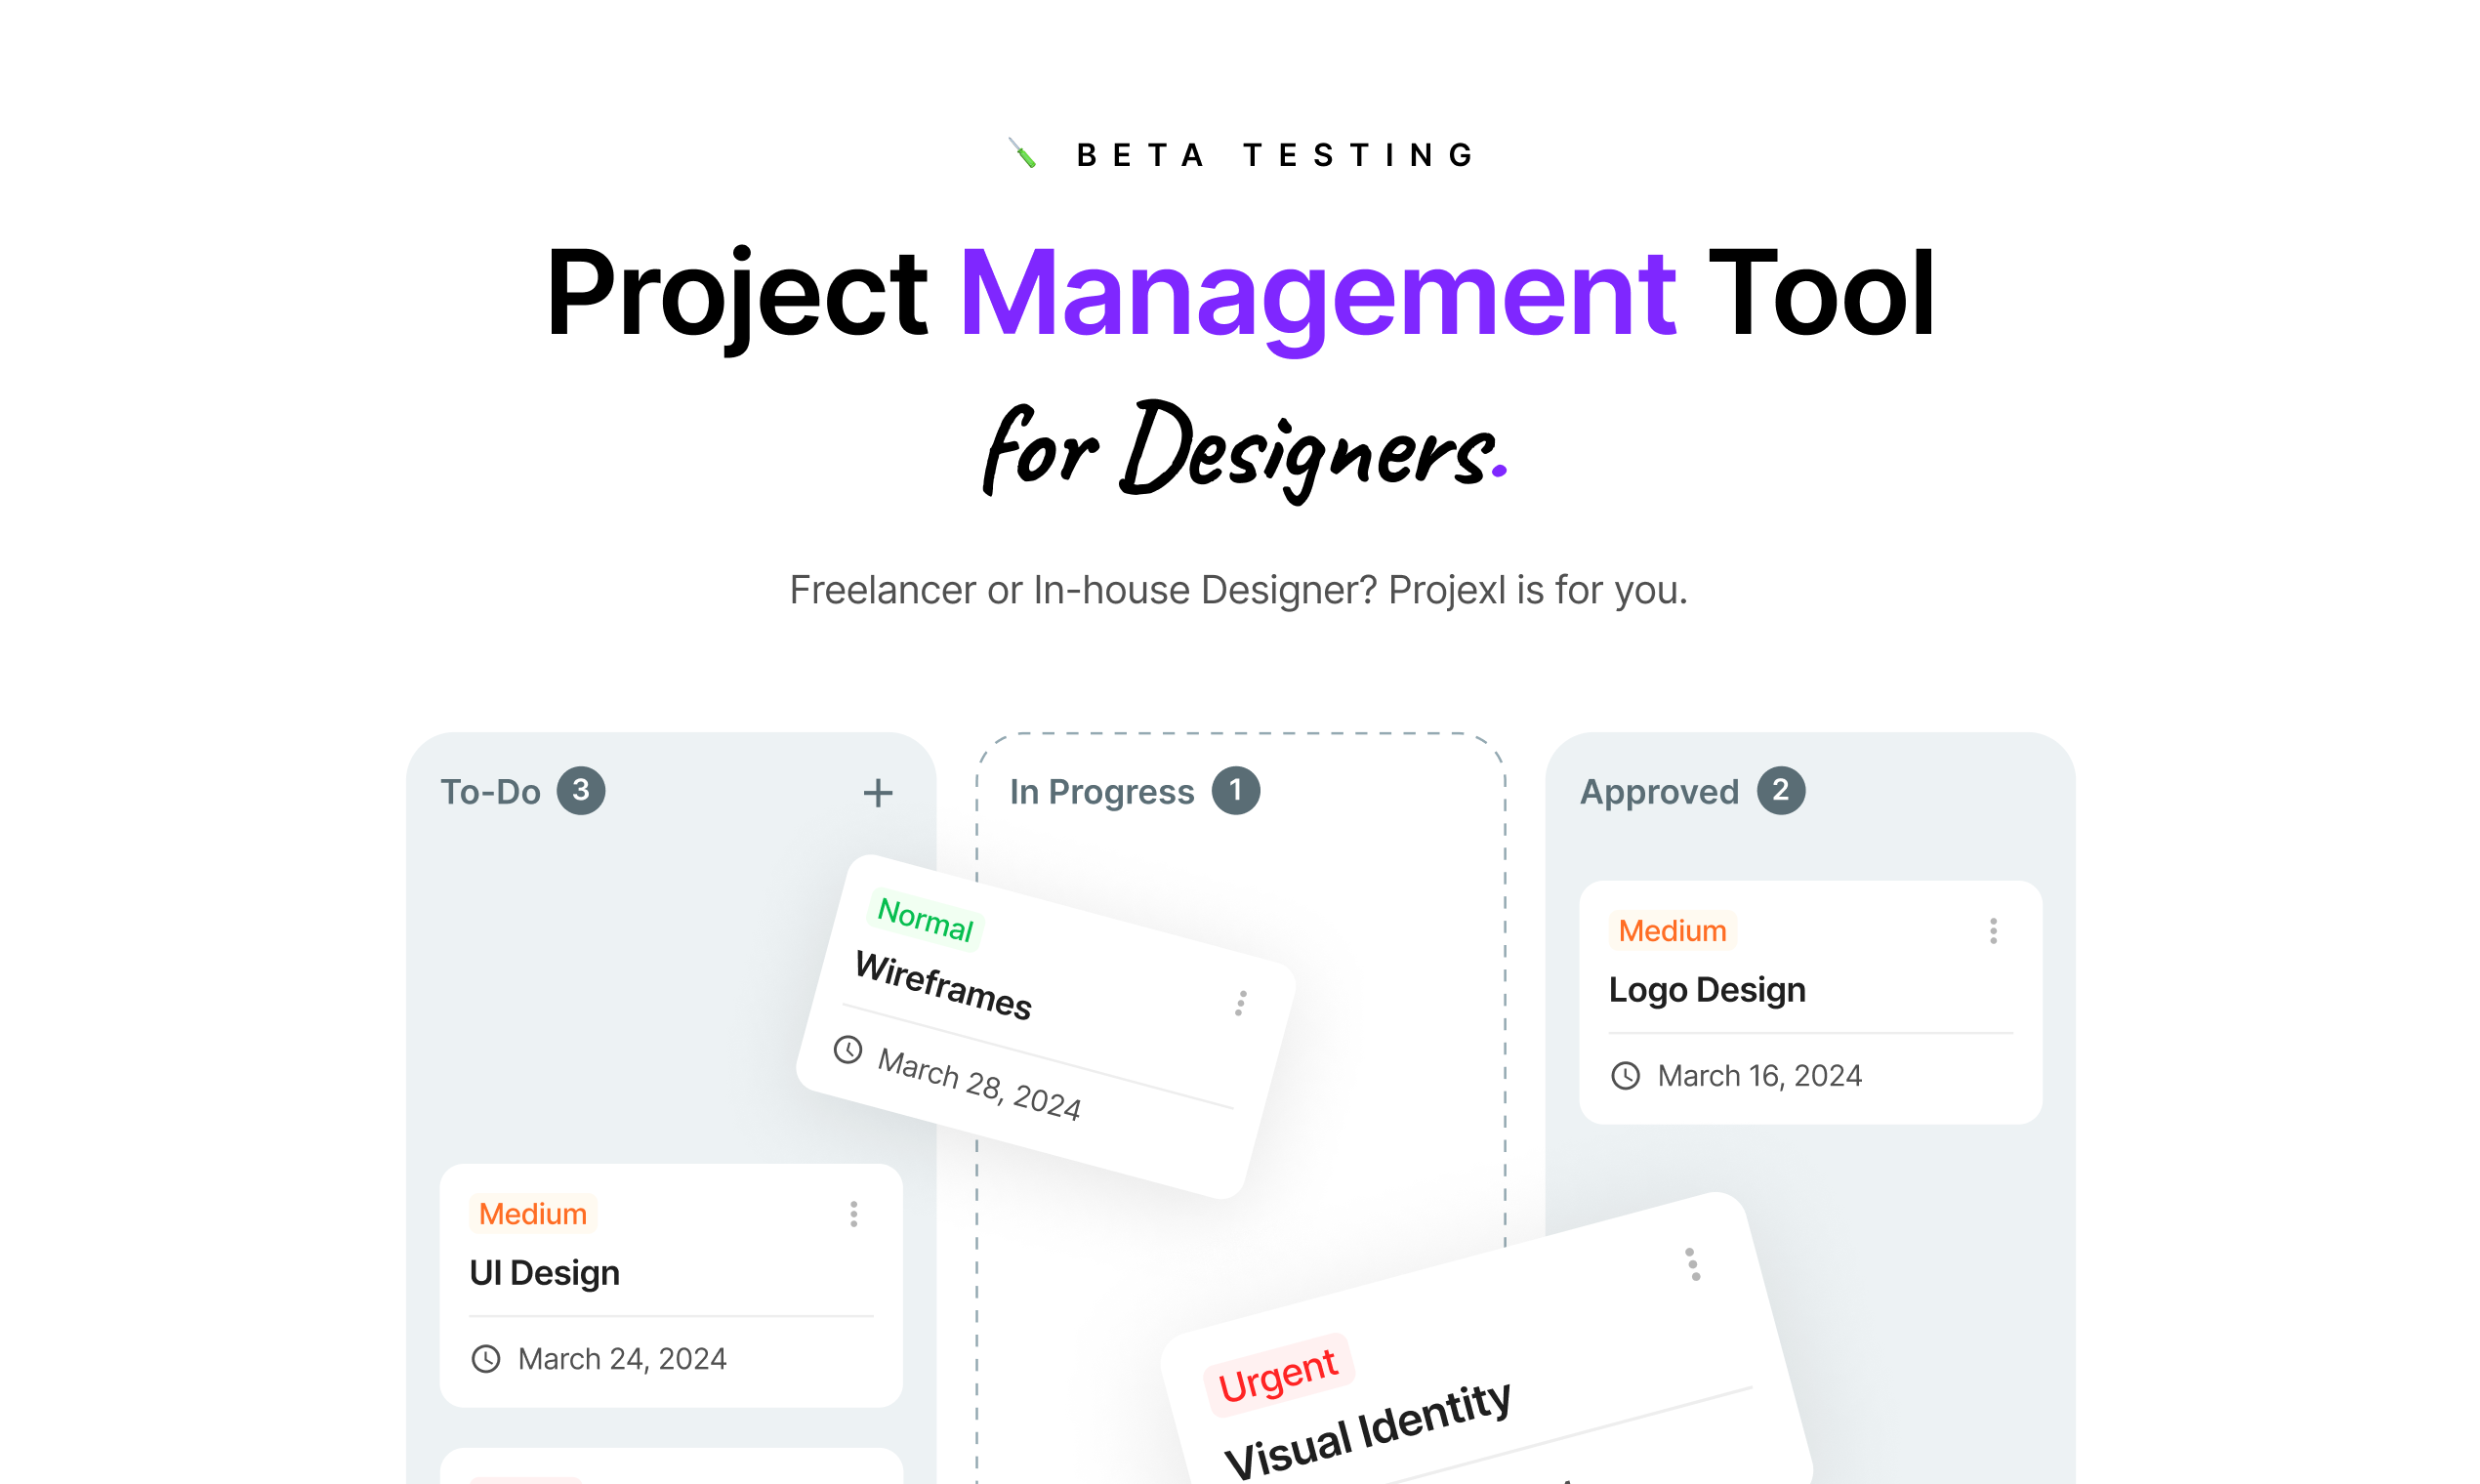 projexl - A project management tool for designers